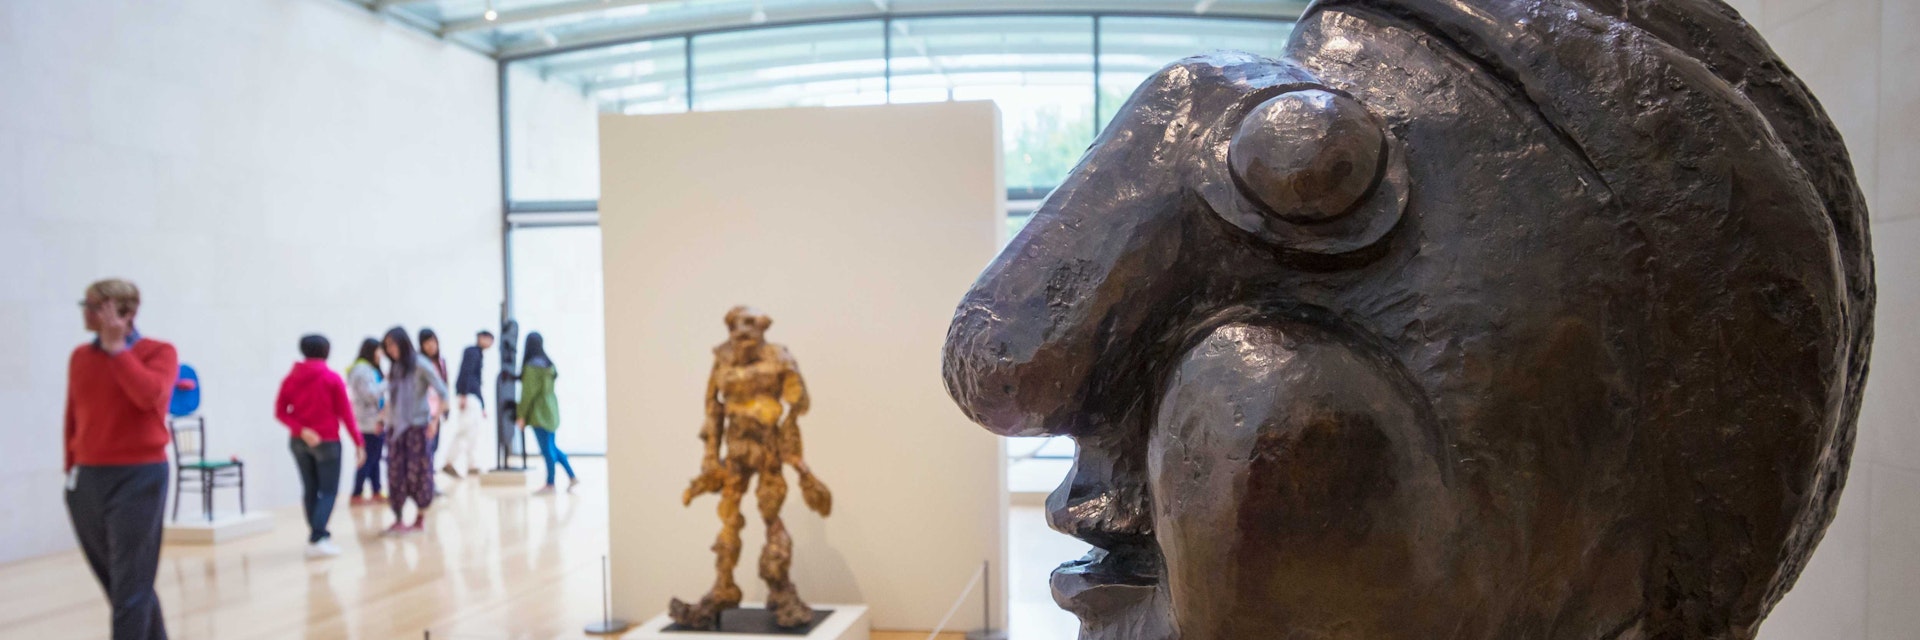 Modern and contemporary art on display in the Nasher Sculpture Center.
The Nasher Sculpture Center, Dallas, Texas. - stock photo
